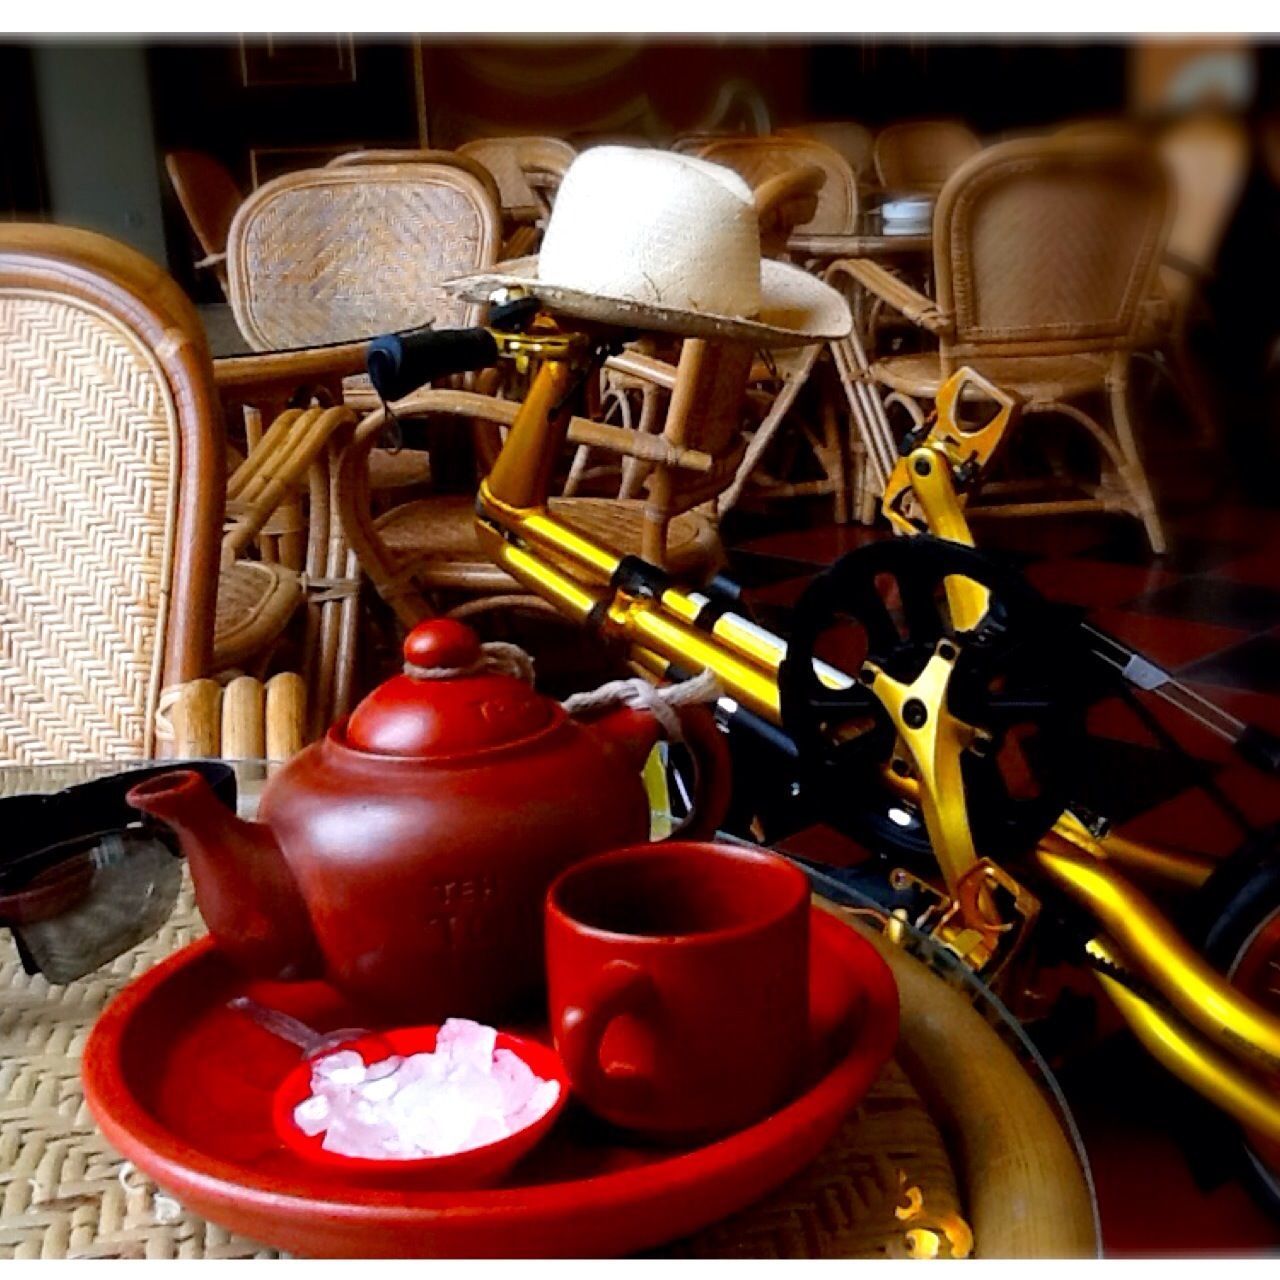 indoors, red, chair, table, illuminated, no people, still life, arrangement, absence, in a row, large group of objects, close-up, old-fashioned, empty, decoration, antique, lighting equipment, restaurant, day, abundance